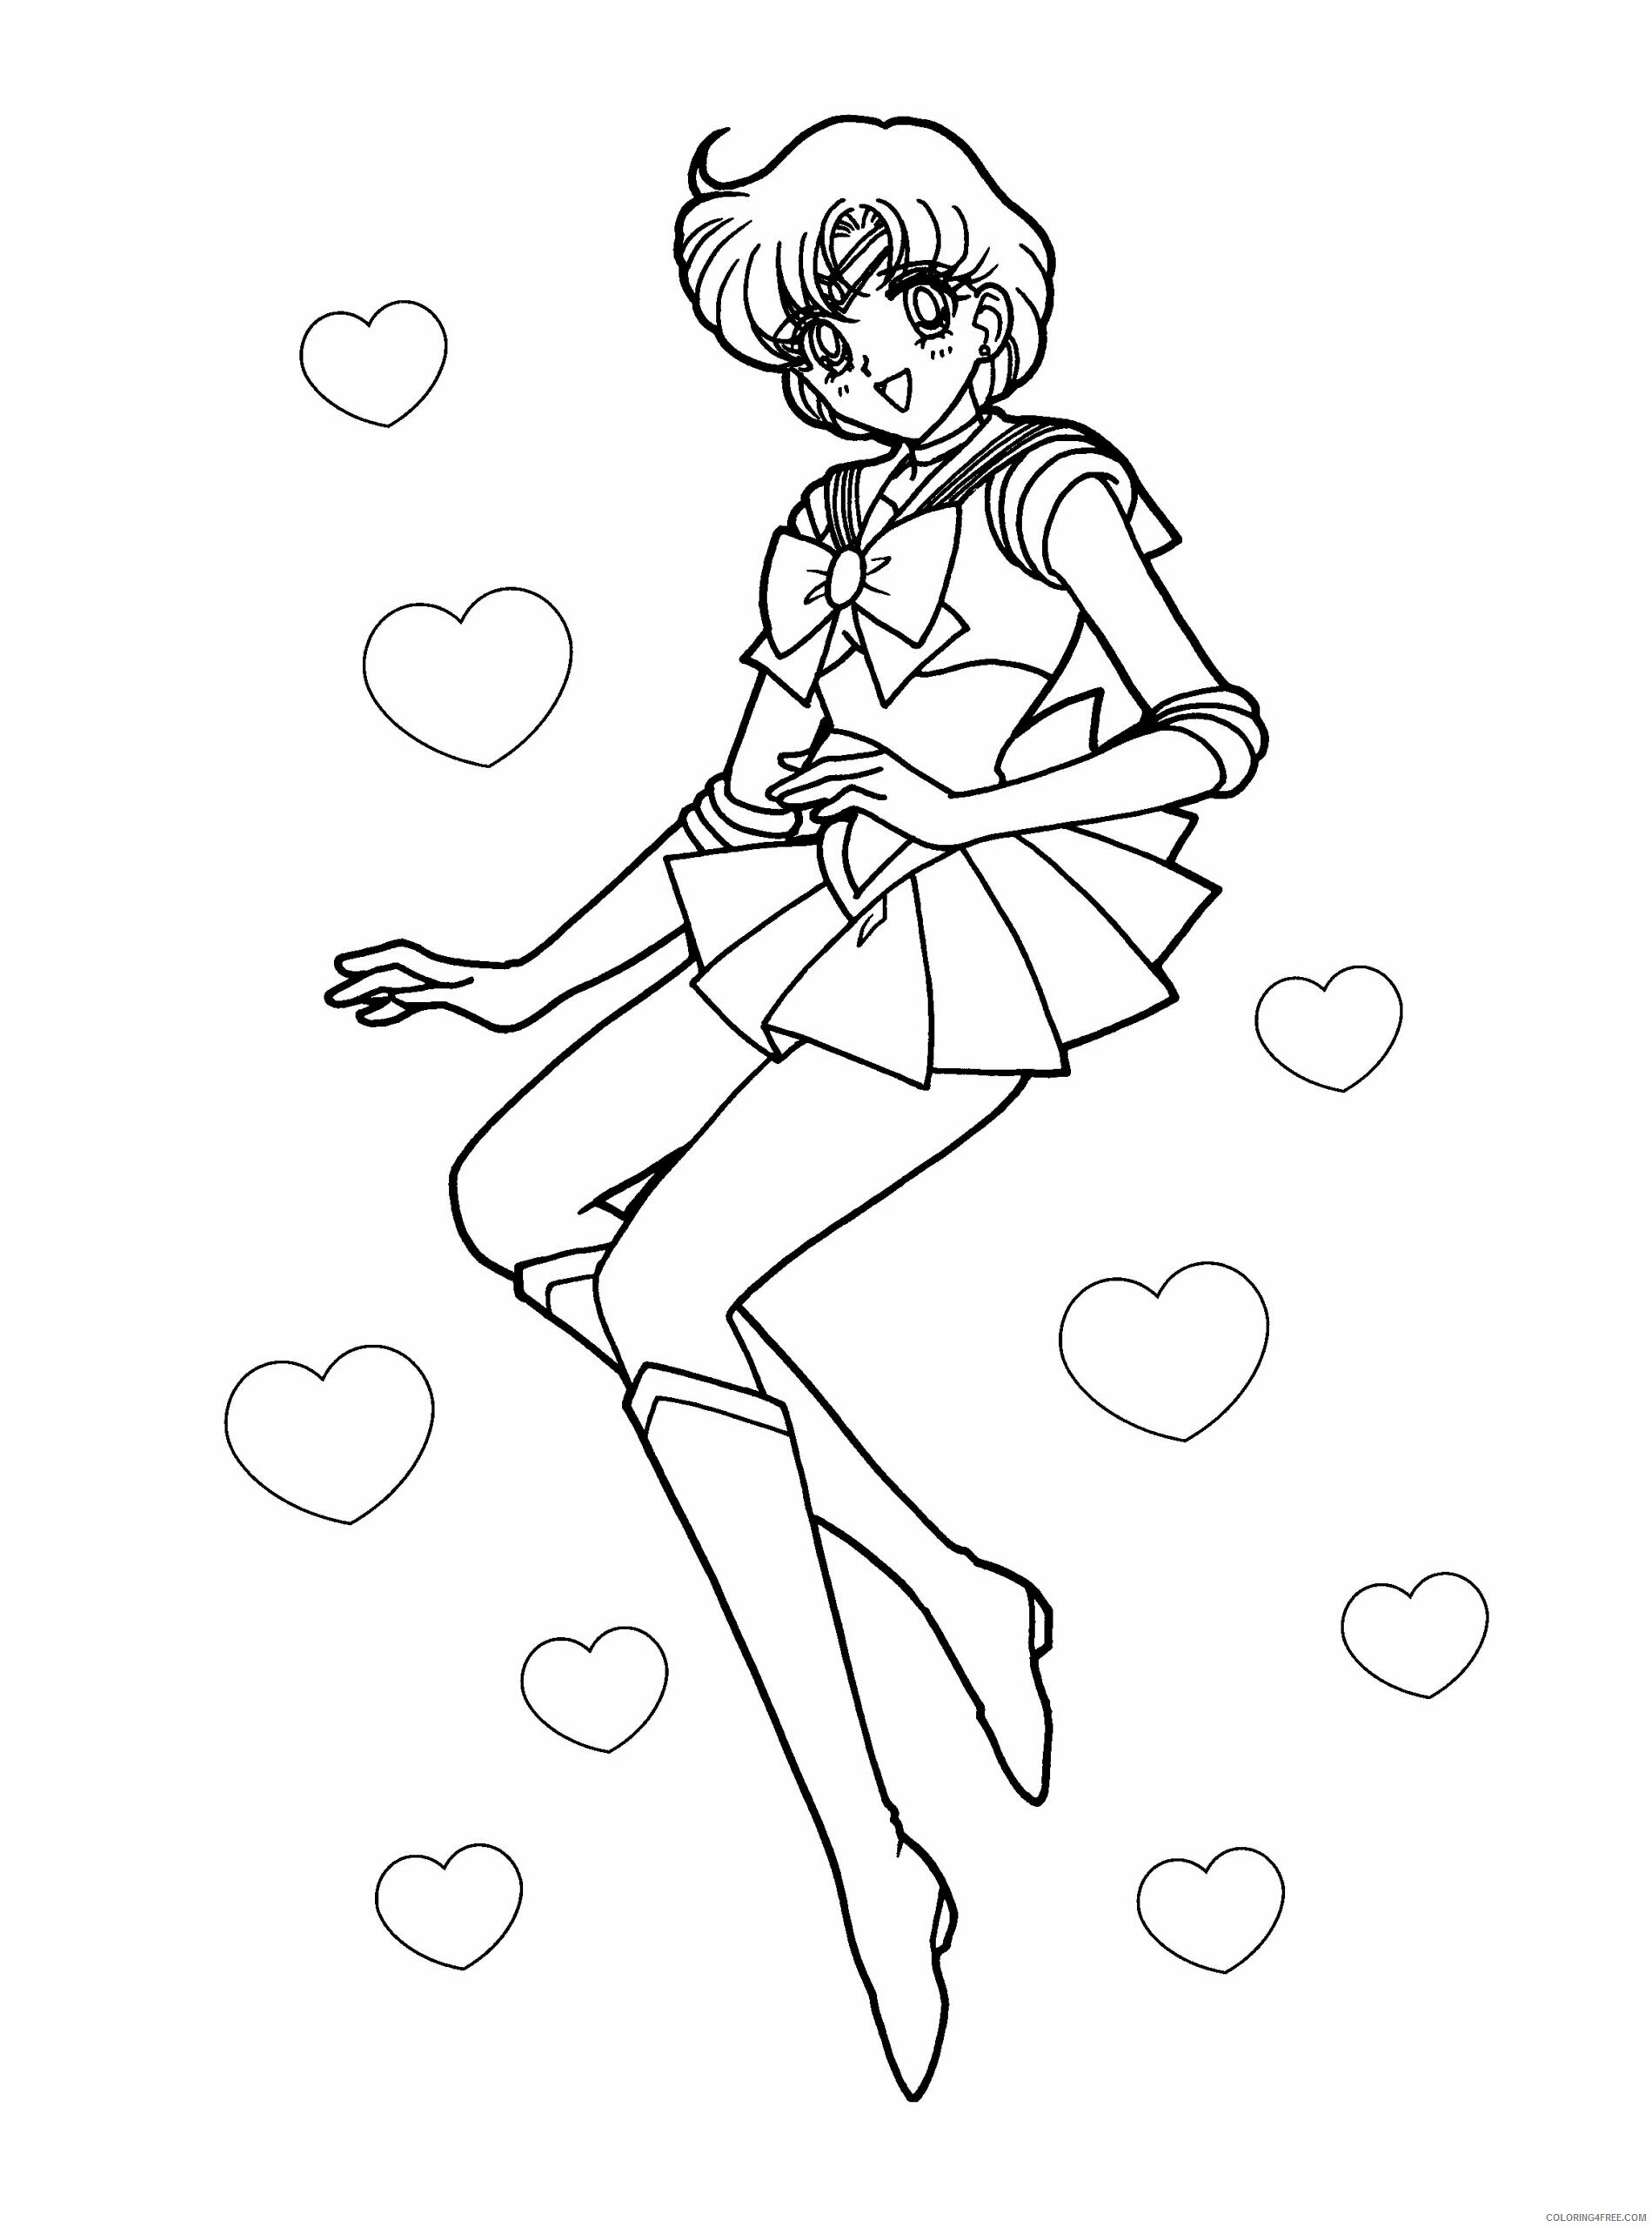 Sailor Moon Printable Coloring Pages Anime sailormoon 65SXT 2021 0983 Coloring4free